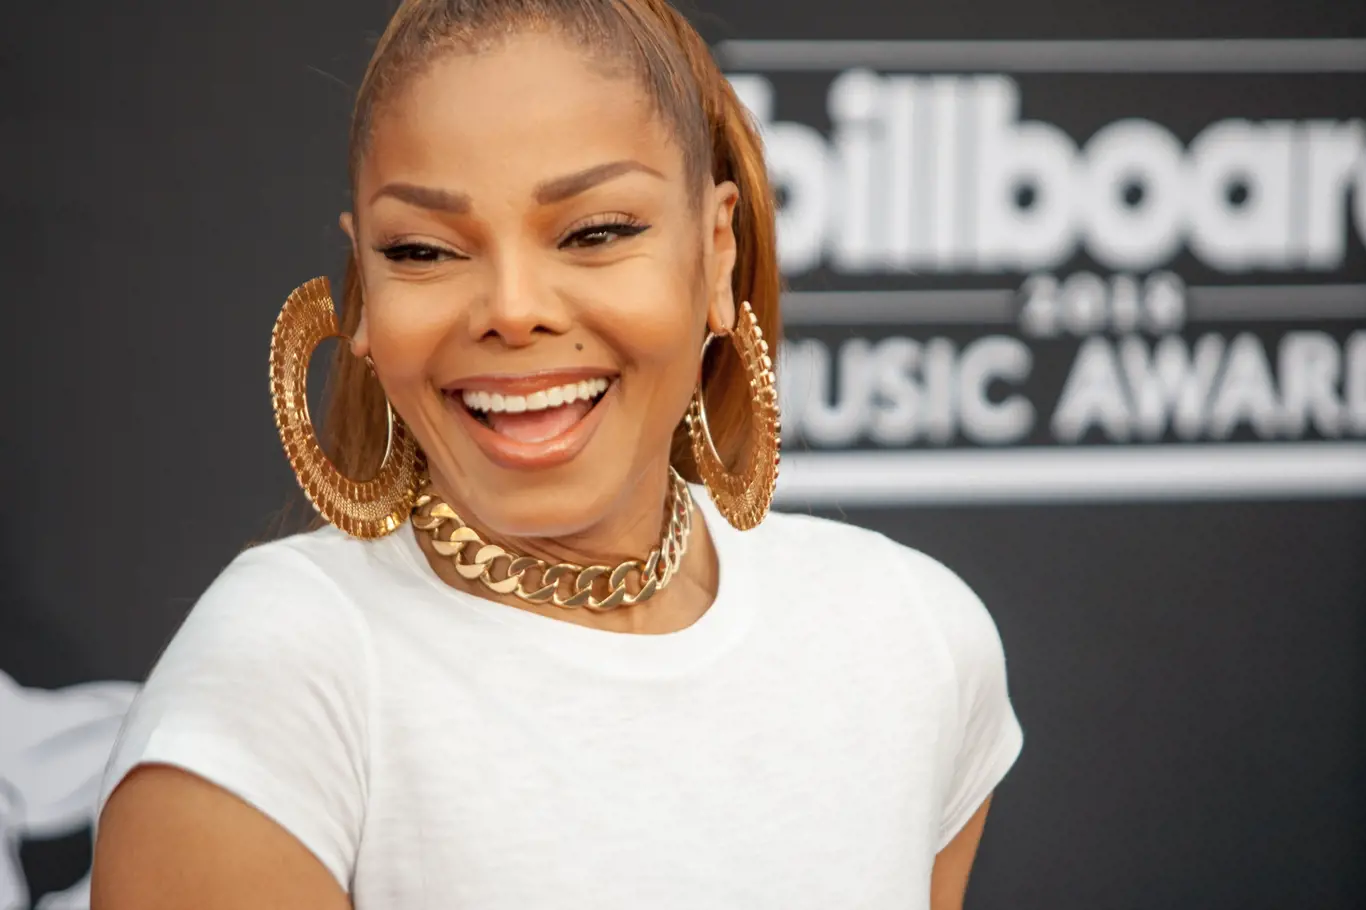 Honoree Janet Jackson attends the Red Carpet  at the 2018 Billboards Music Awards at the MGM Grand Arena in Las Vegas, Nevada USA on May 20th 2018